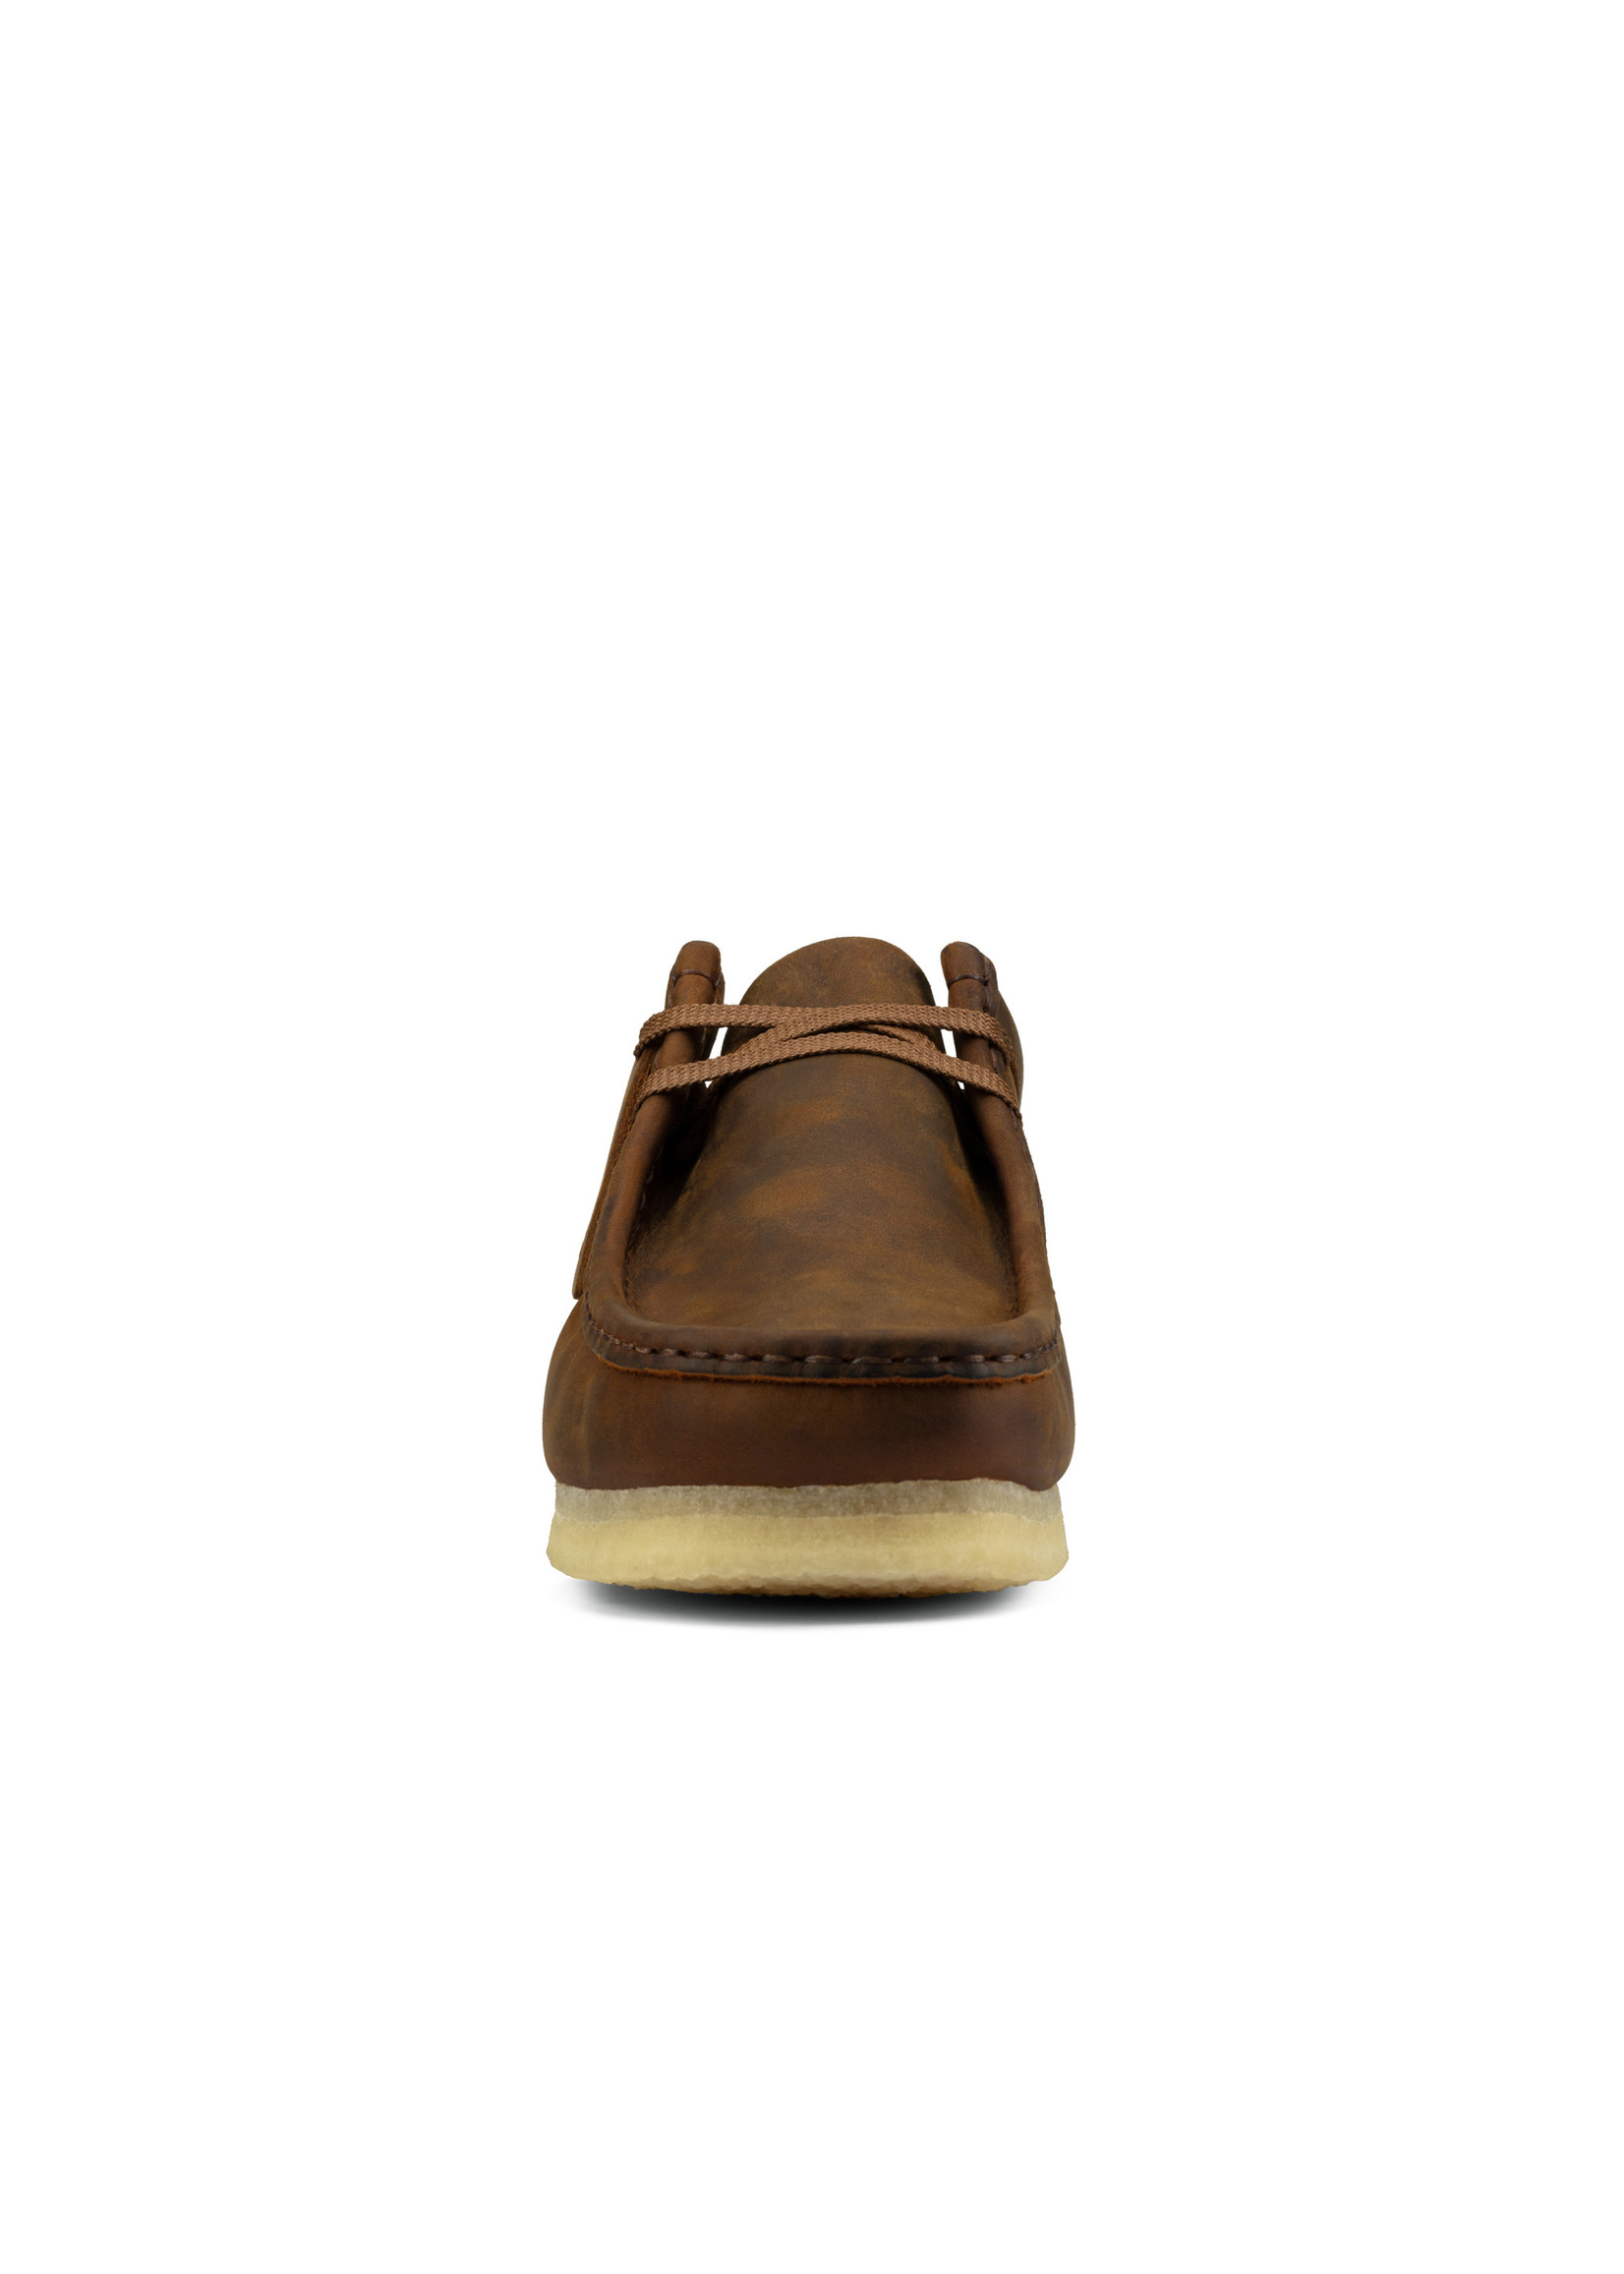 Clarks Mens Iconic Wallabee Beeswax Brown Leather 26156605